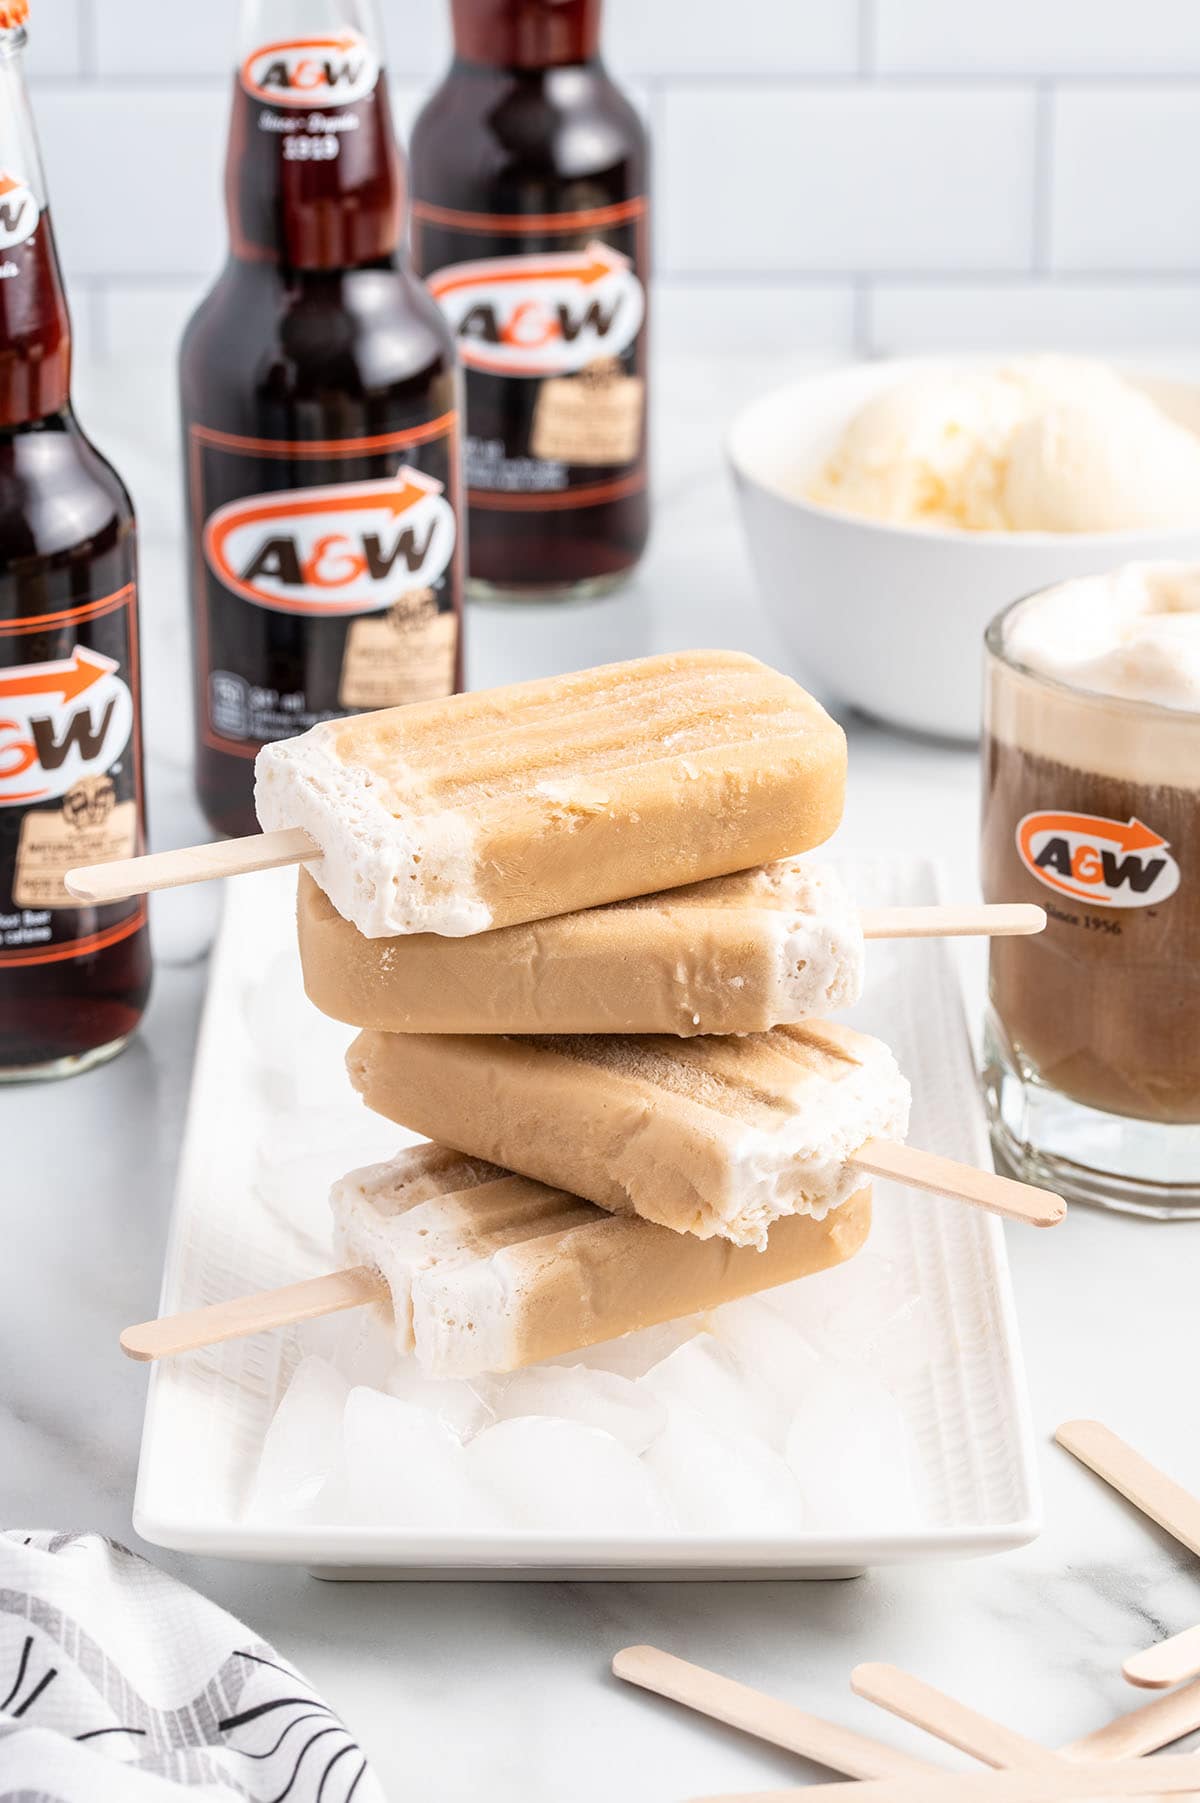 4 pieces of Root Beer Popsicles